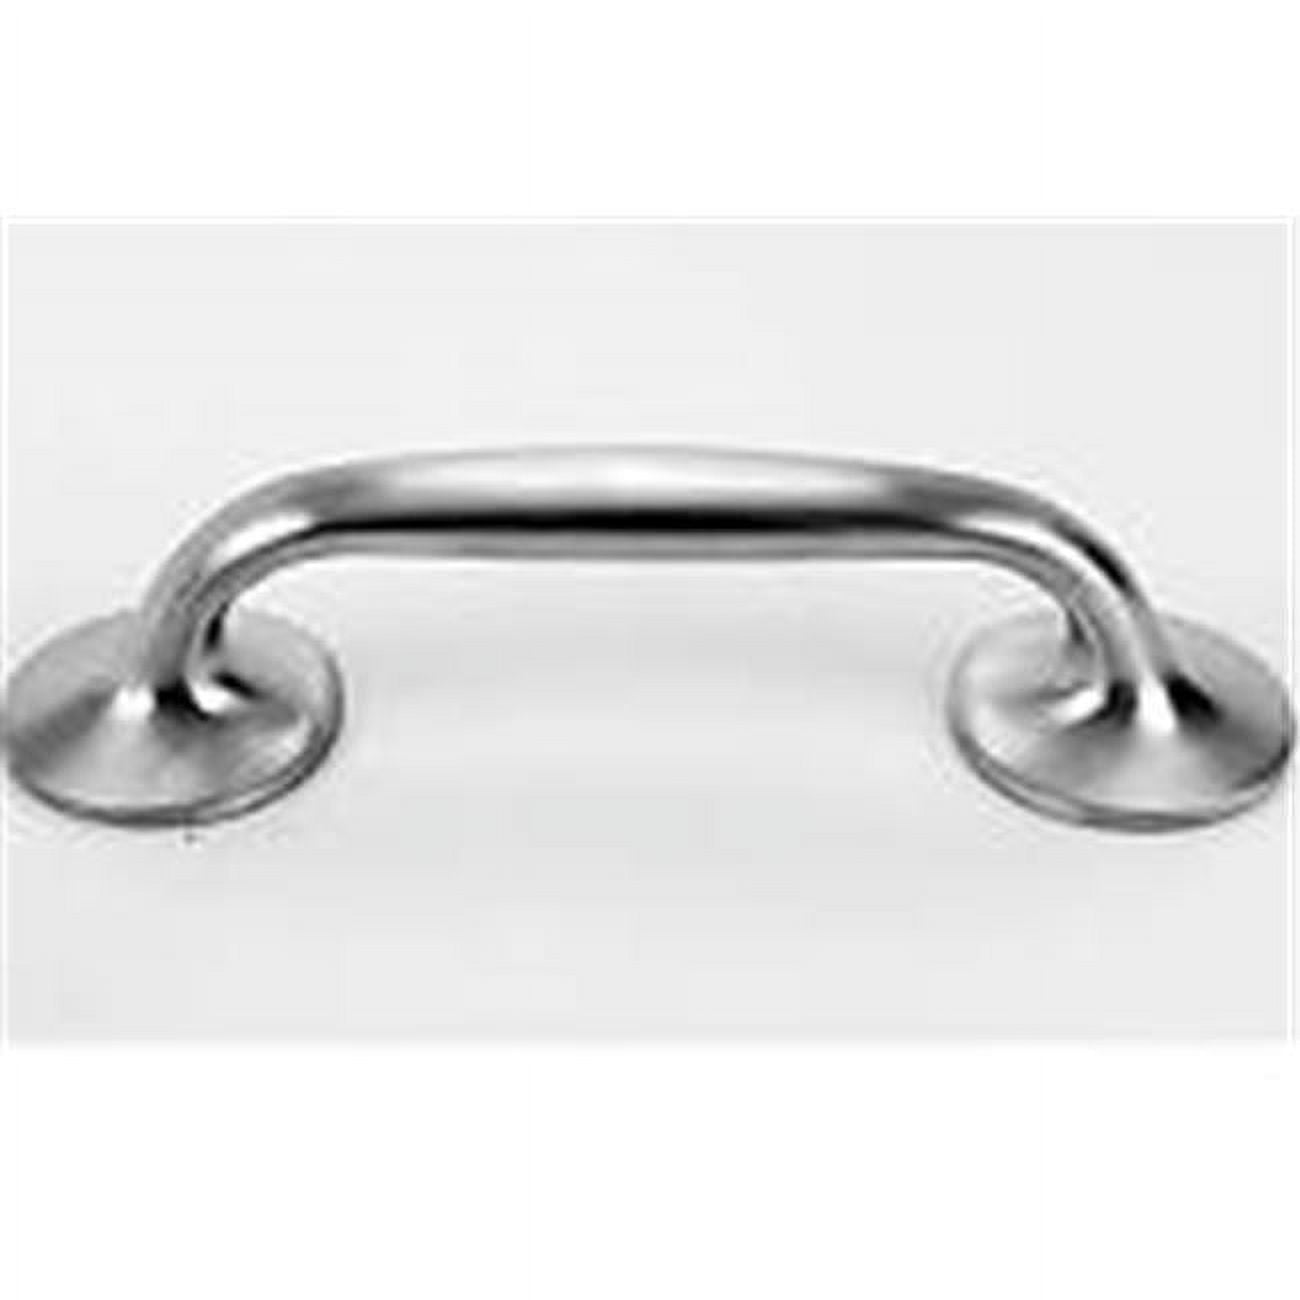 36-630 5.5 In. Stainless Steel Ctc Concealed Mounted Cast Door Pull